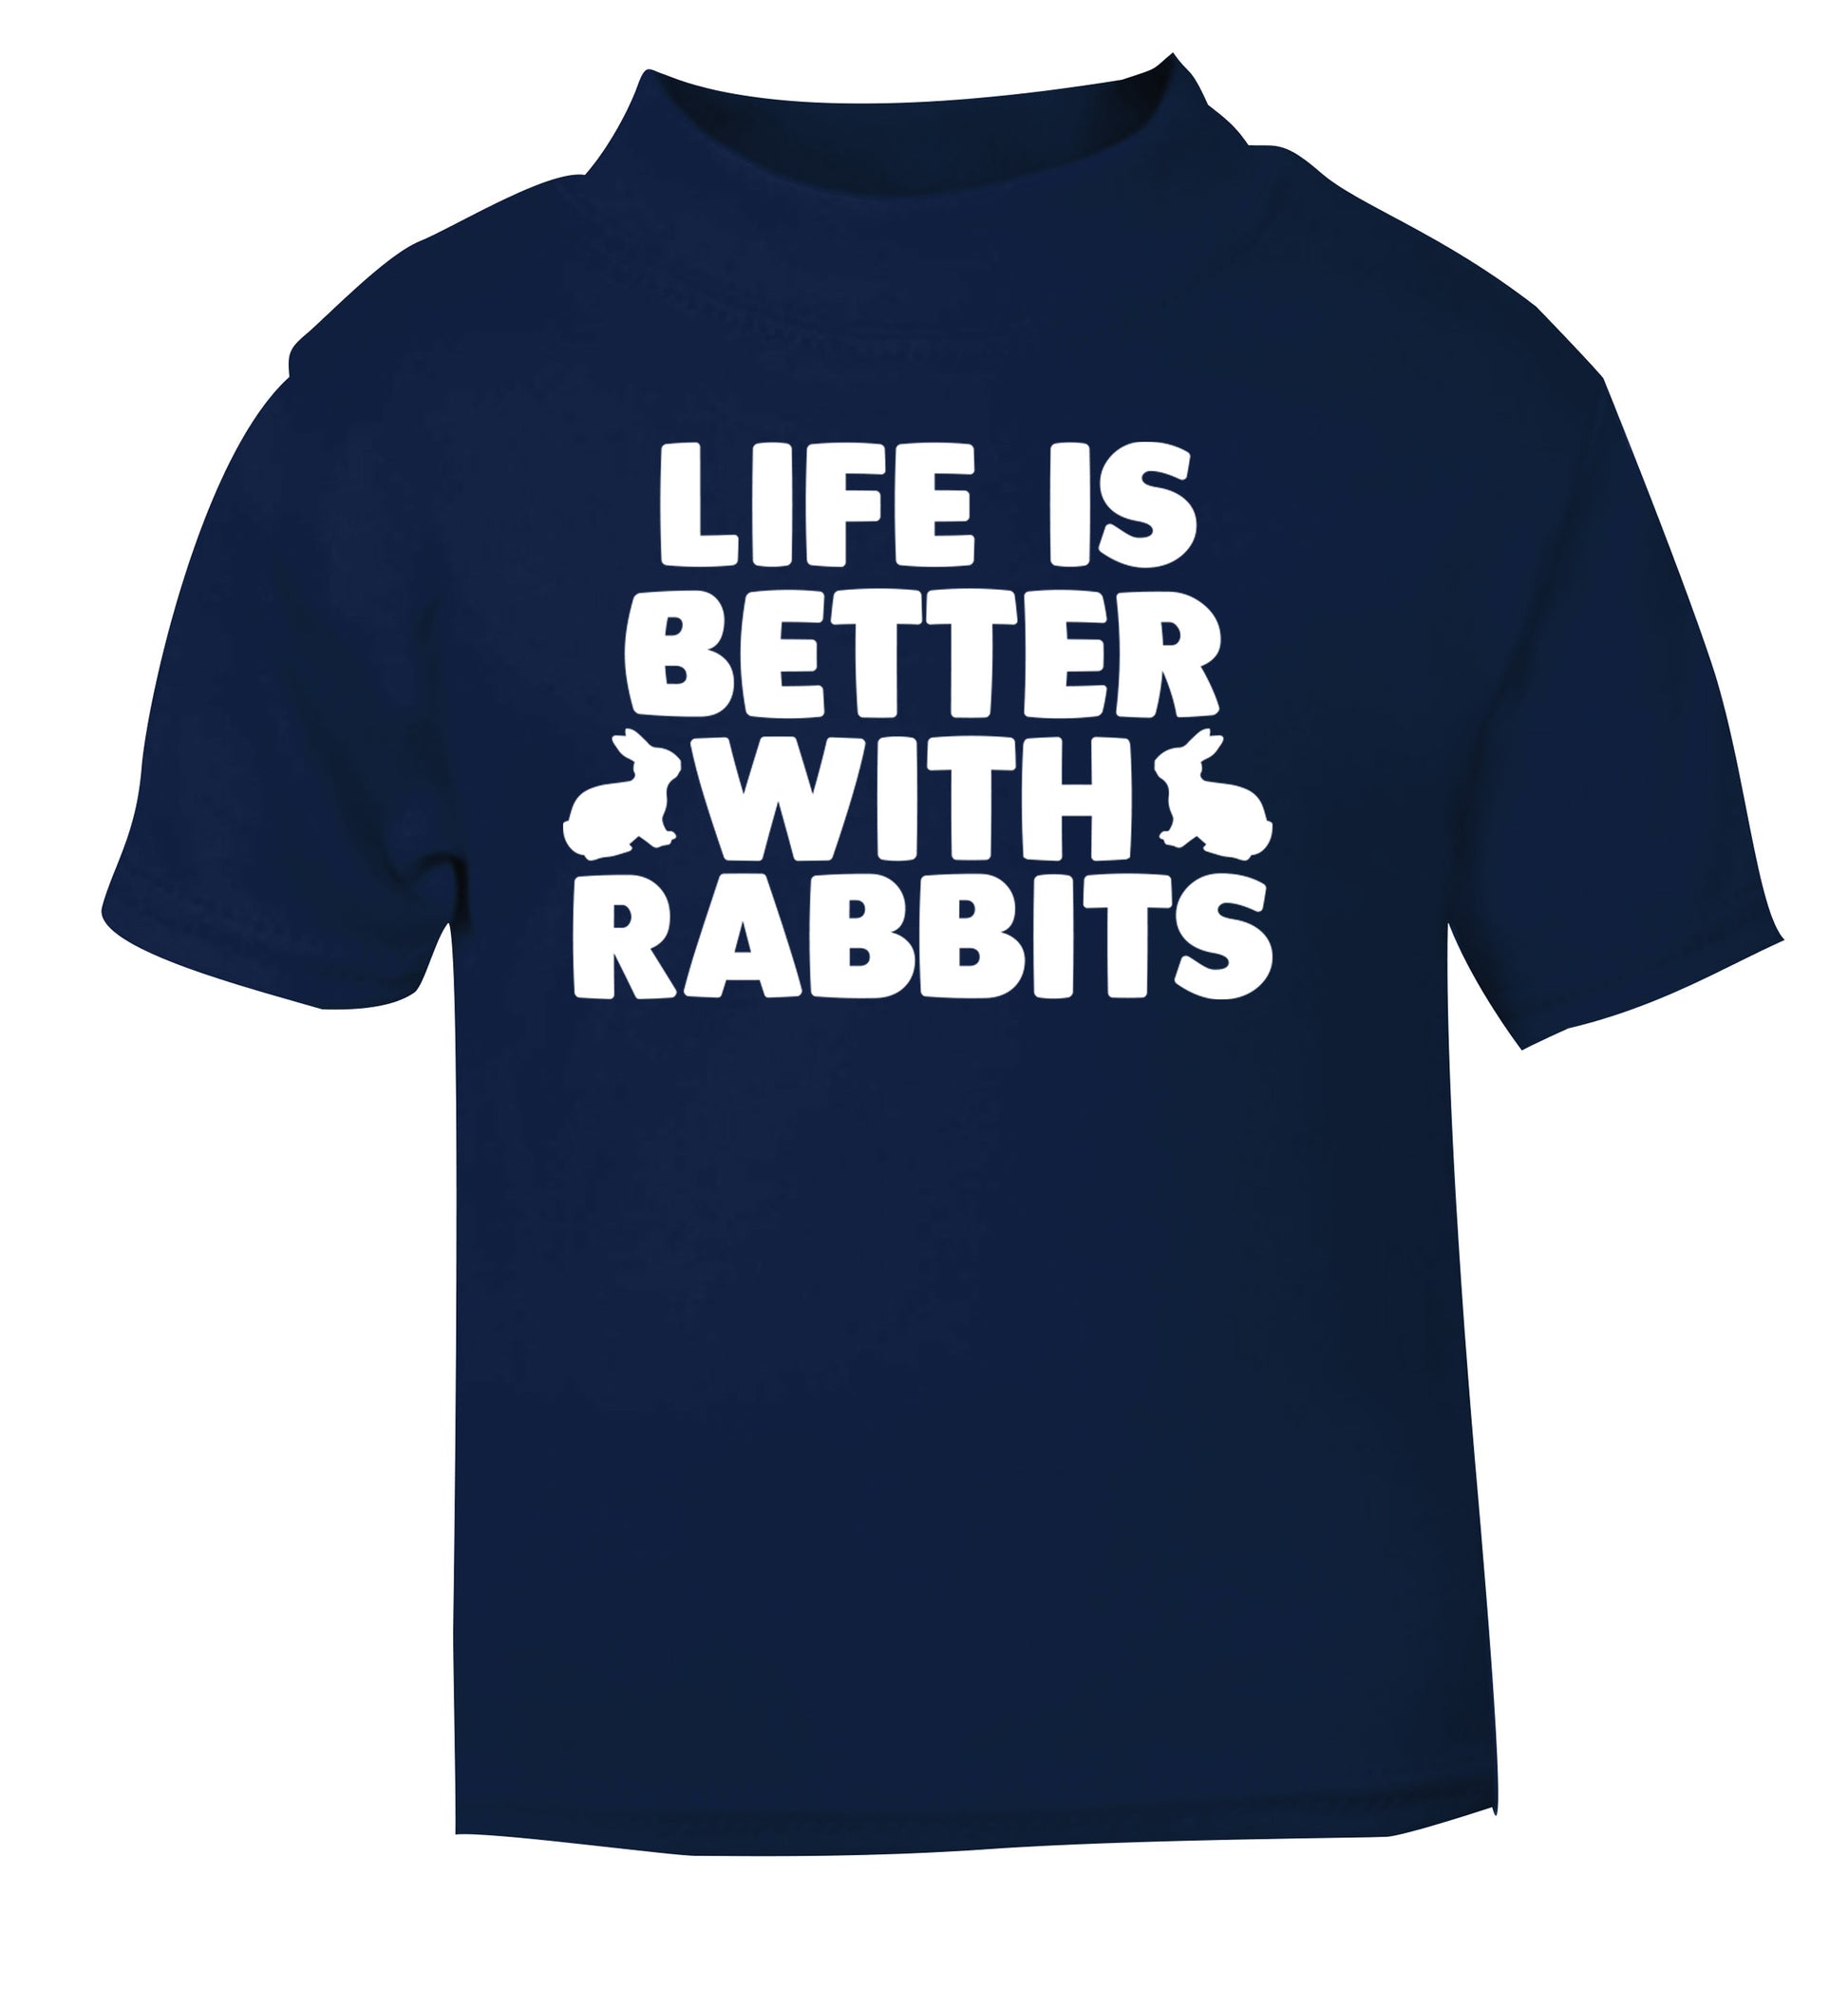 Life is better with rabbits navy Baby Toddler Tshirt 2 Years